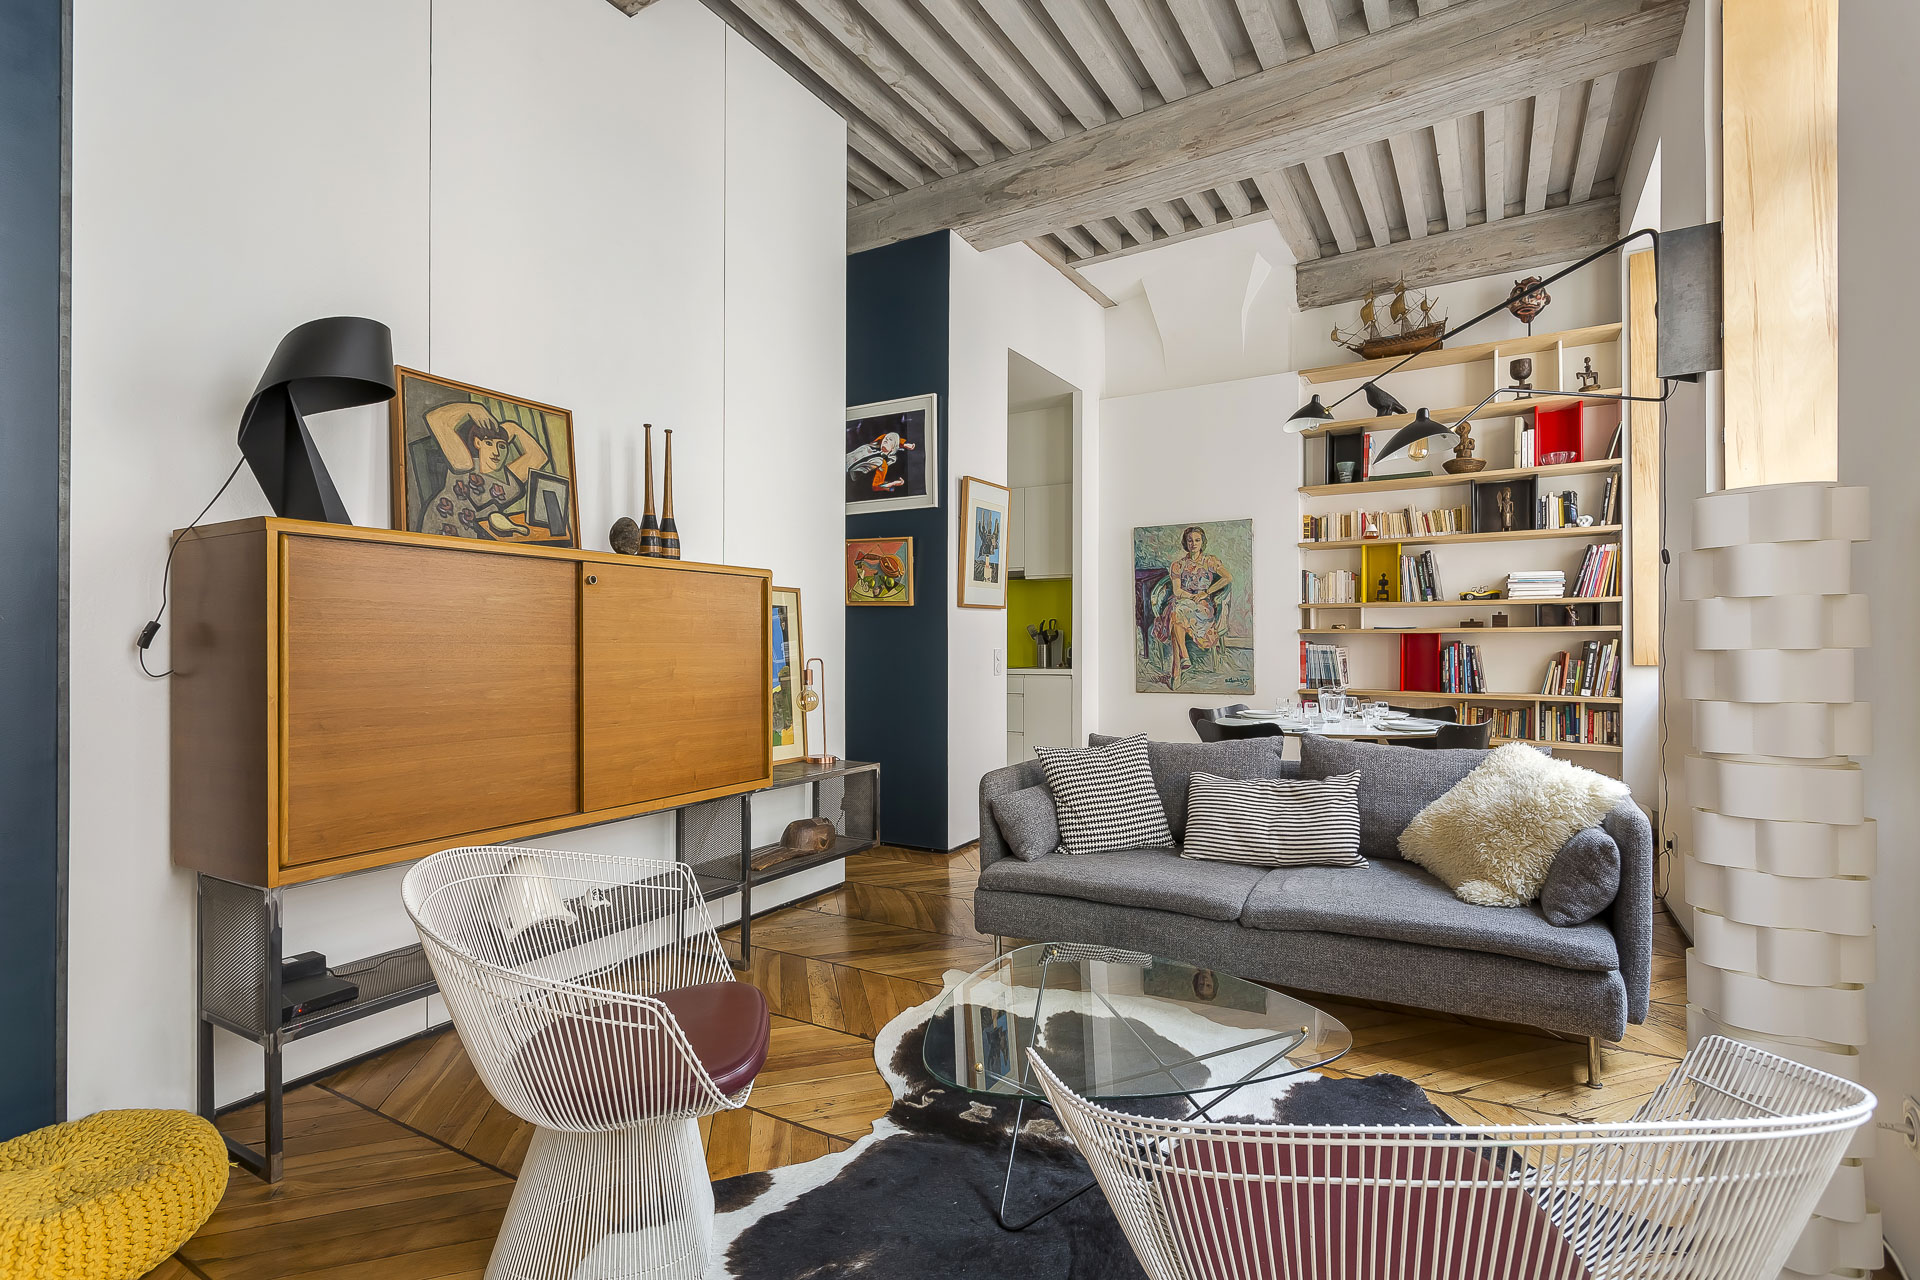 Polycarpe – 2 bedrooms close to Opéra House and place des Terreaux